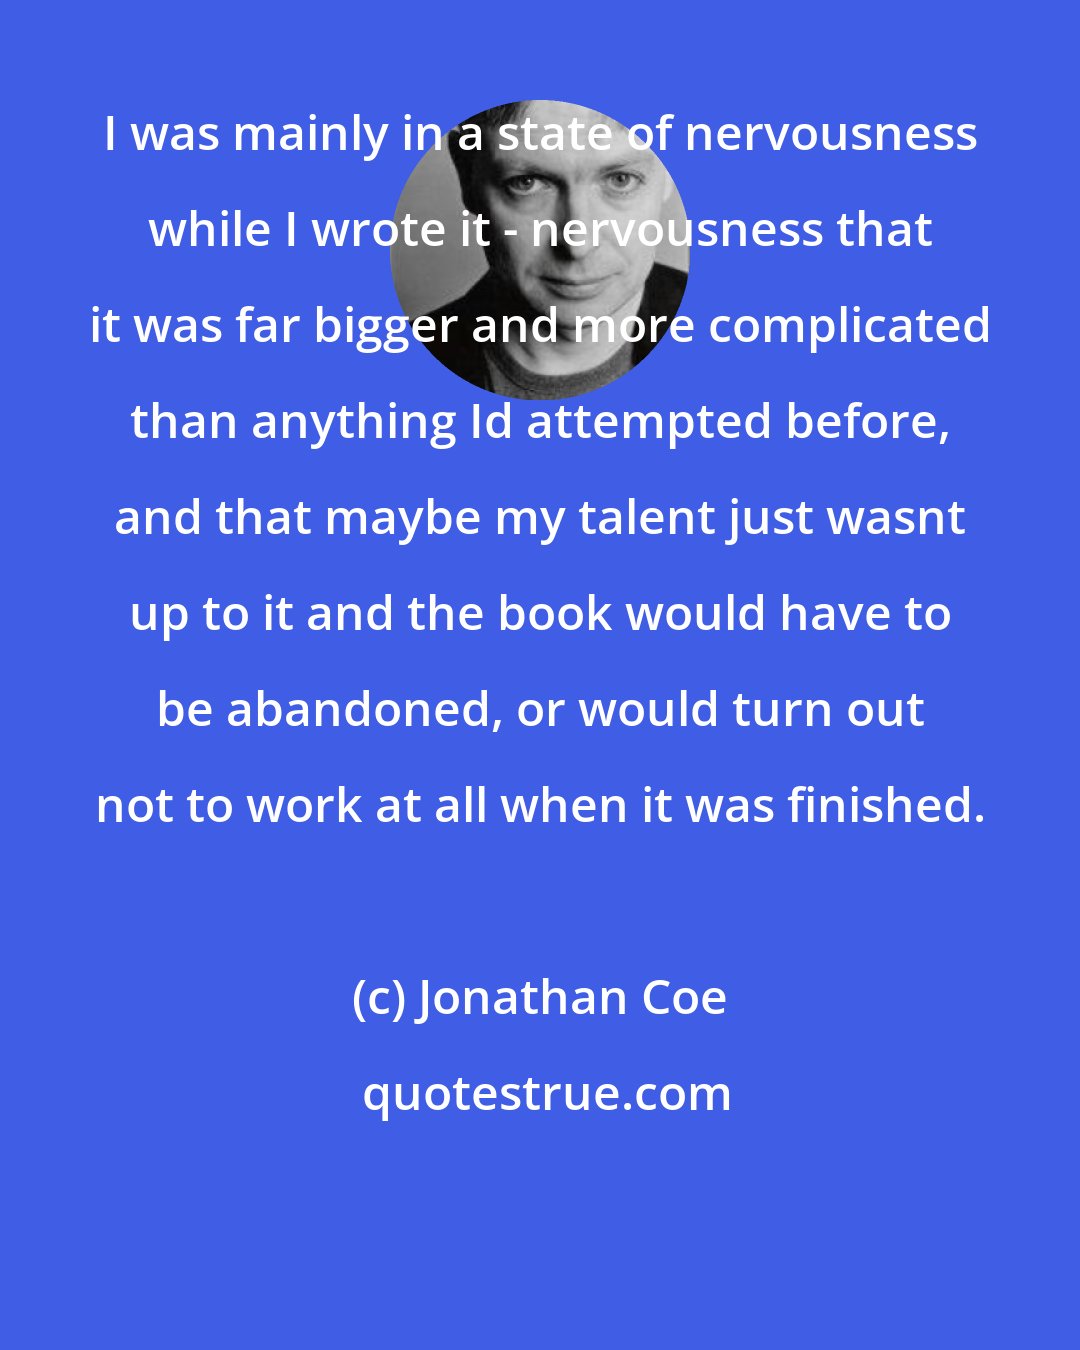 Jonathan Coe: I was mainly in a state of nervousness while I wrote it - nervousness that it was far bigger and more complicated than anything Id attempted before, and that maybe my talent just wasnt up to it and the book would have to be abandoned, or would turn out not to work at all when it was finished.